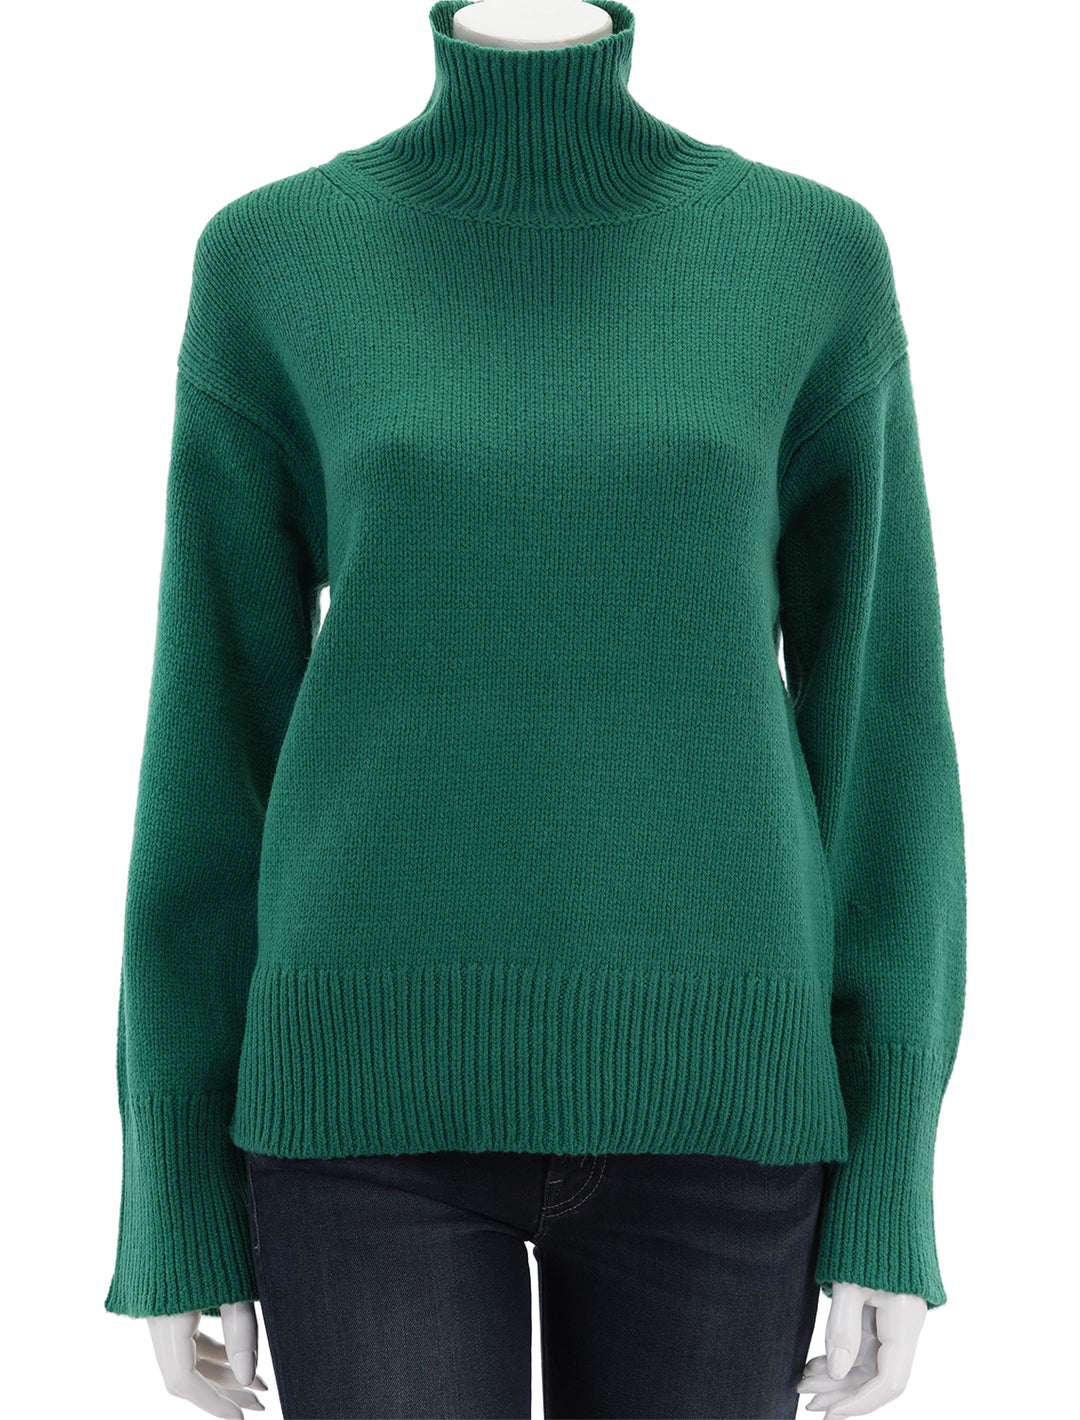 Front view of Alex Mill's betty turtleneck in evergreen.